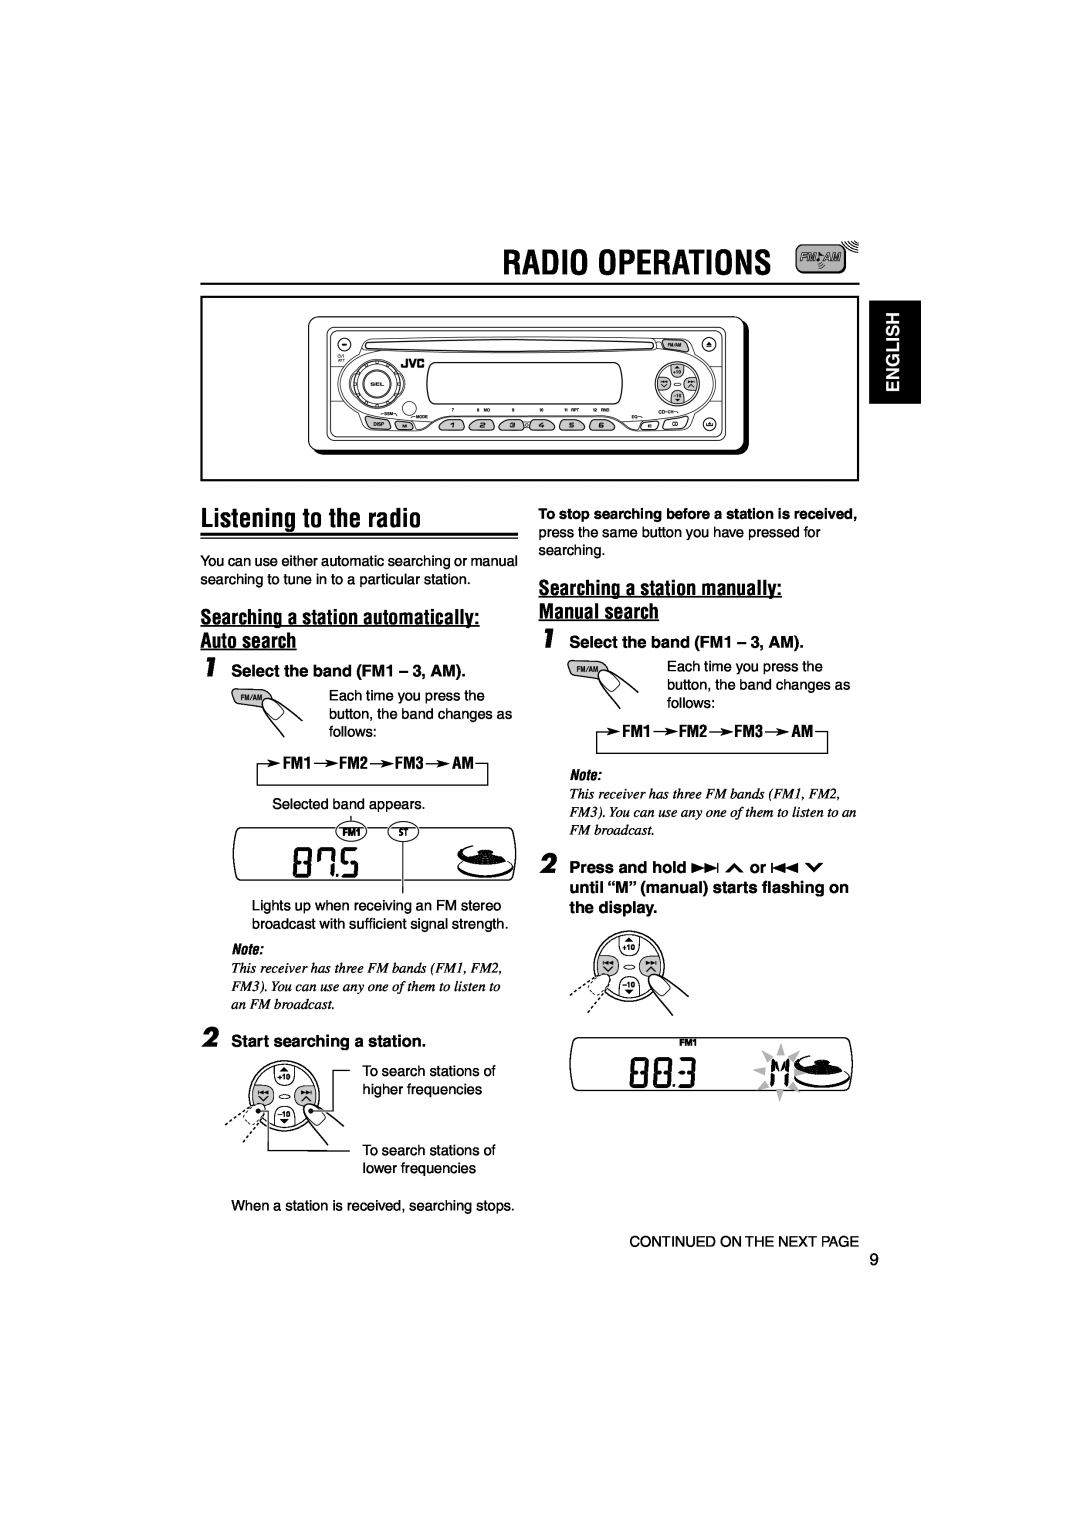 JVC KD-SX695, KD-SX745 Radio Operations, Listening to the radio, Searching a station automatically Auto search, English 